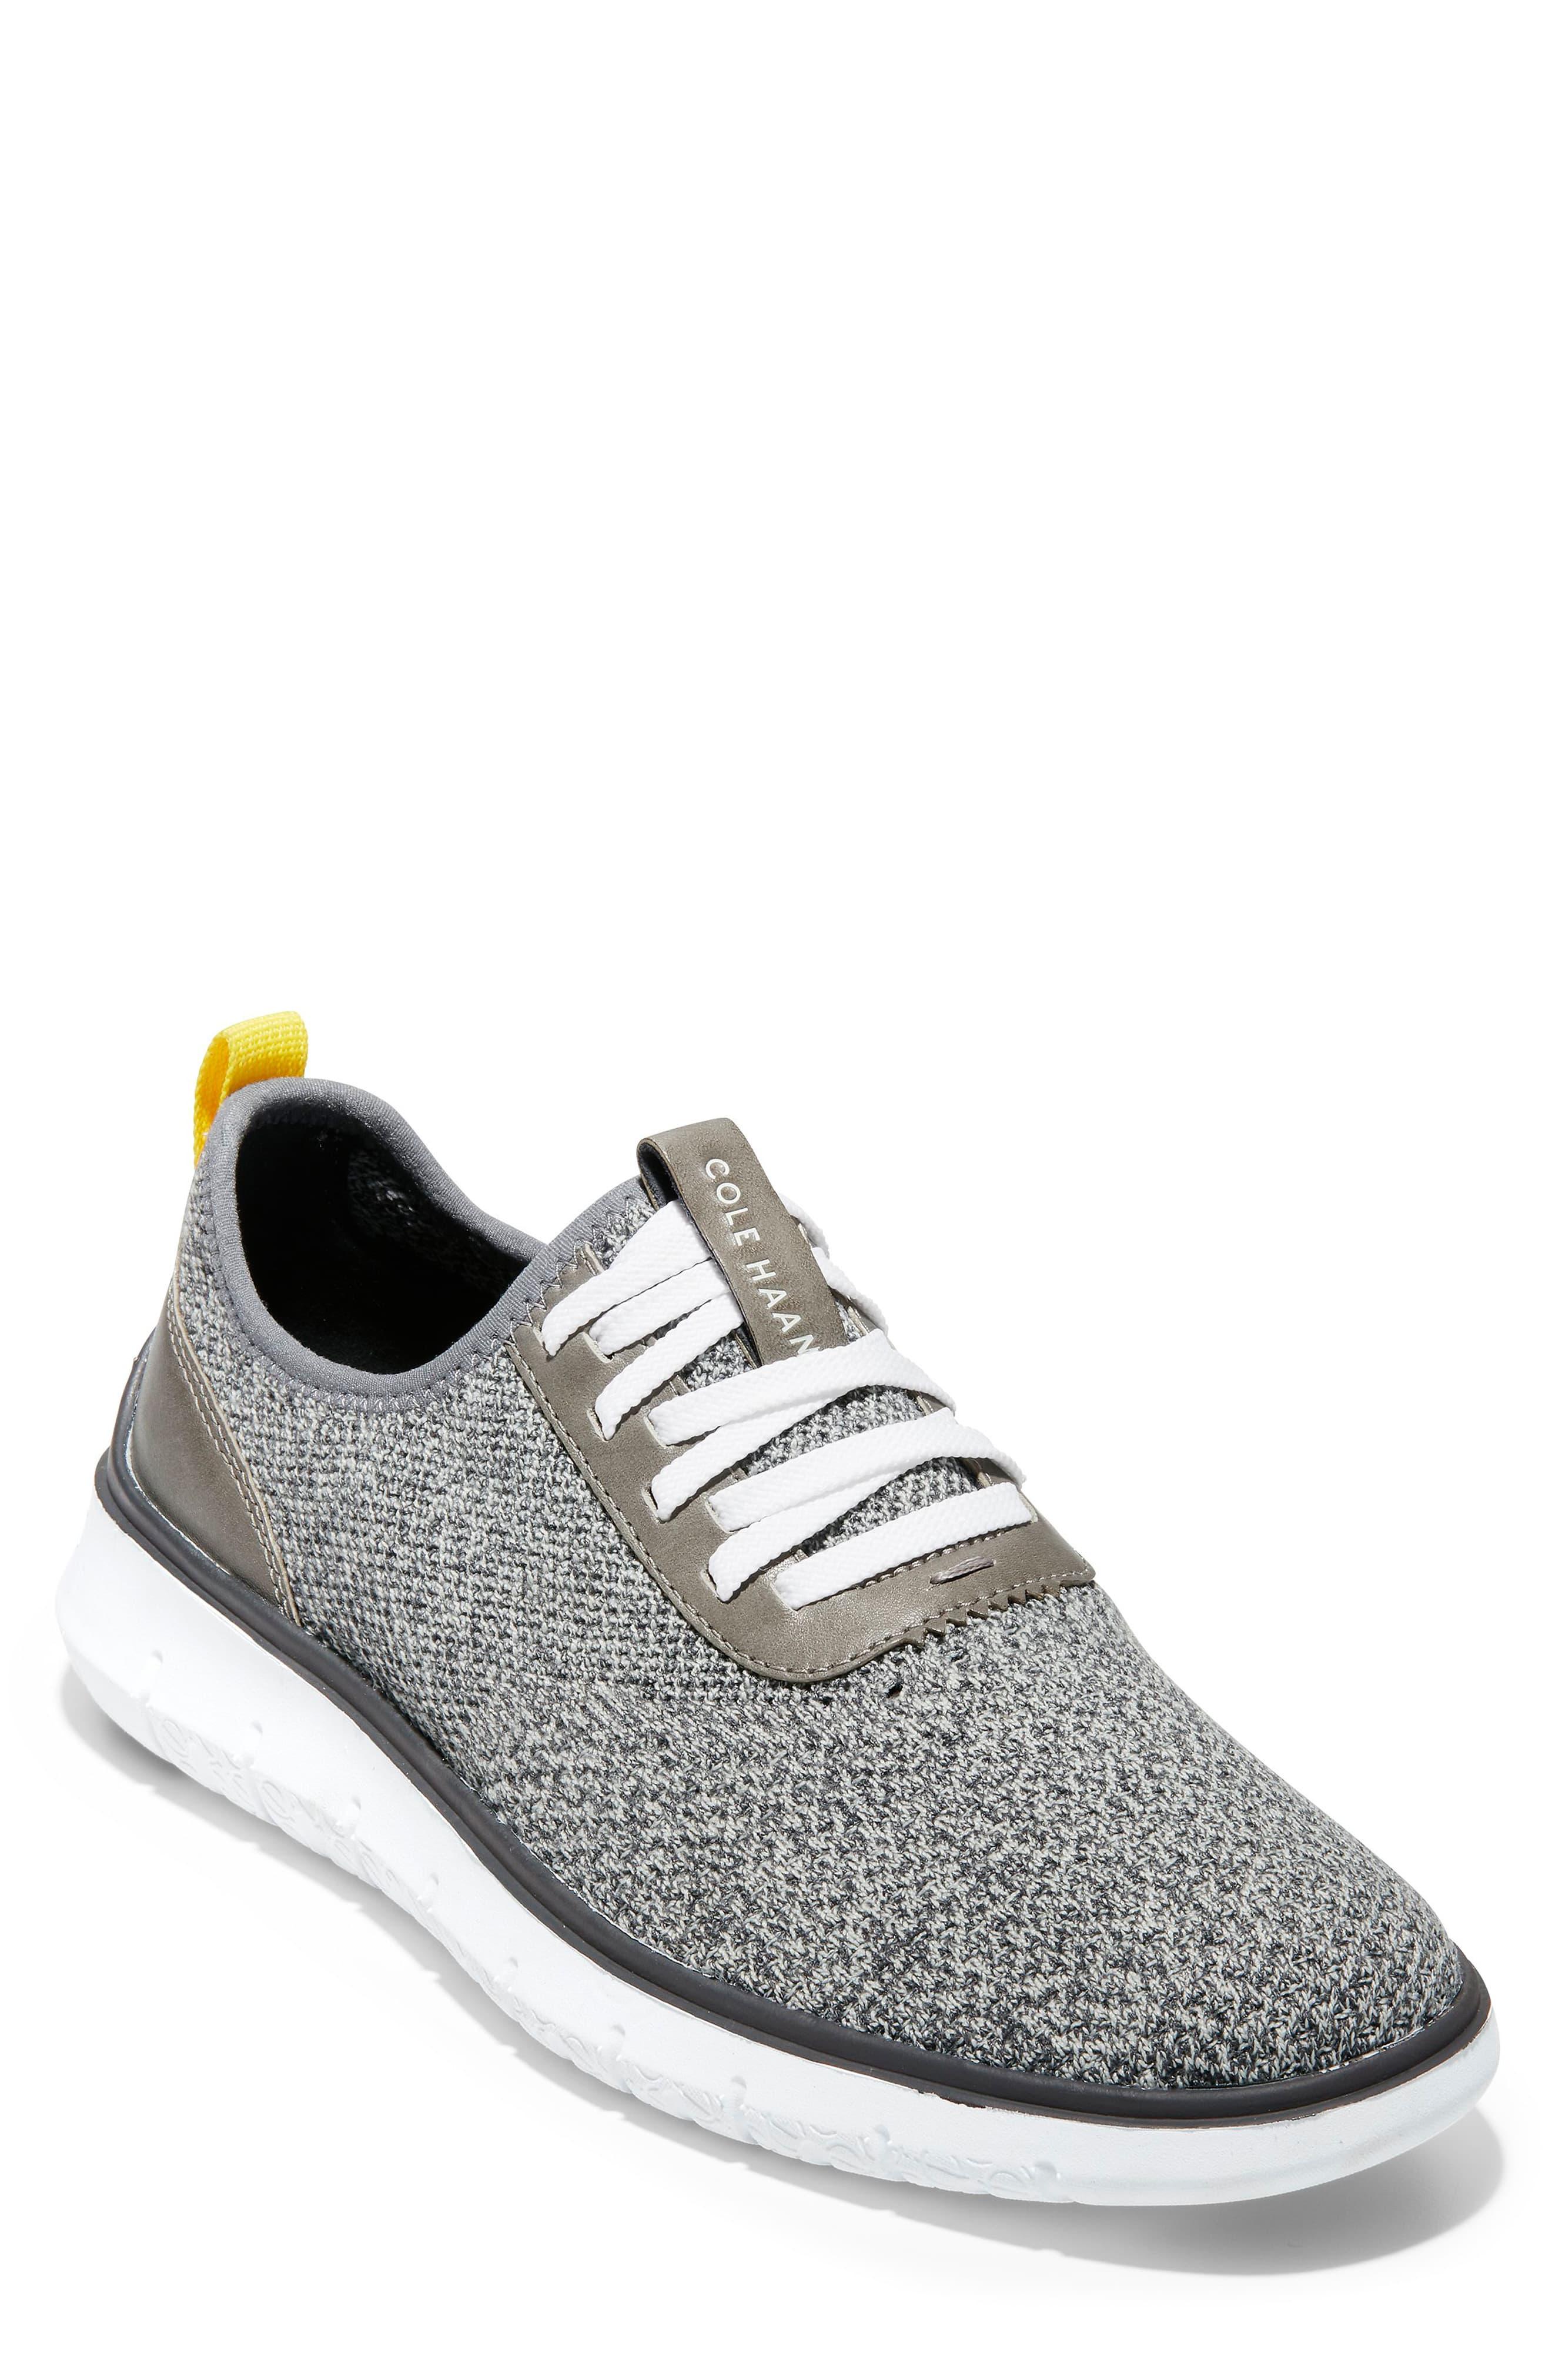 Cole Haan Generation Zerogrand Stitchlite Sneaker in Gray for Men - Lyst